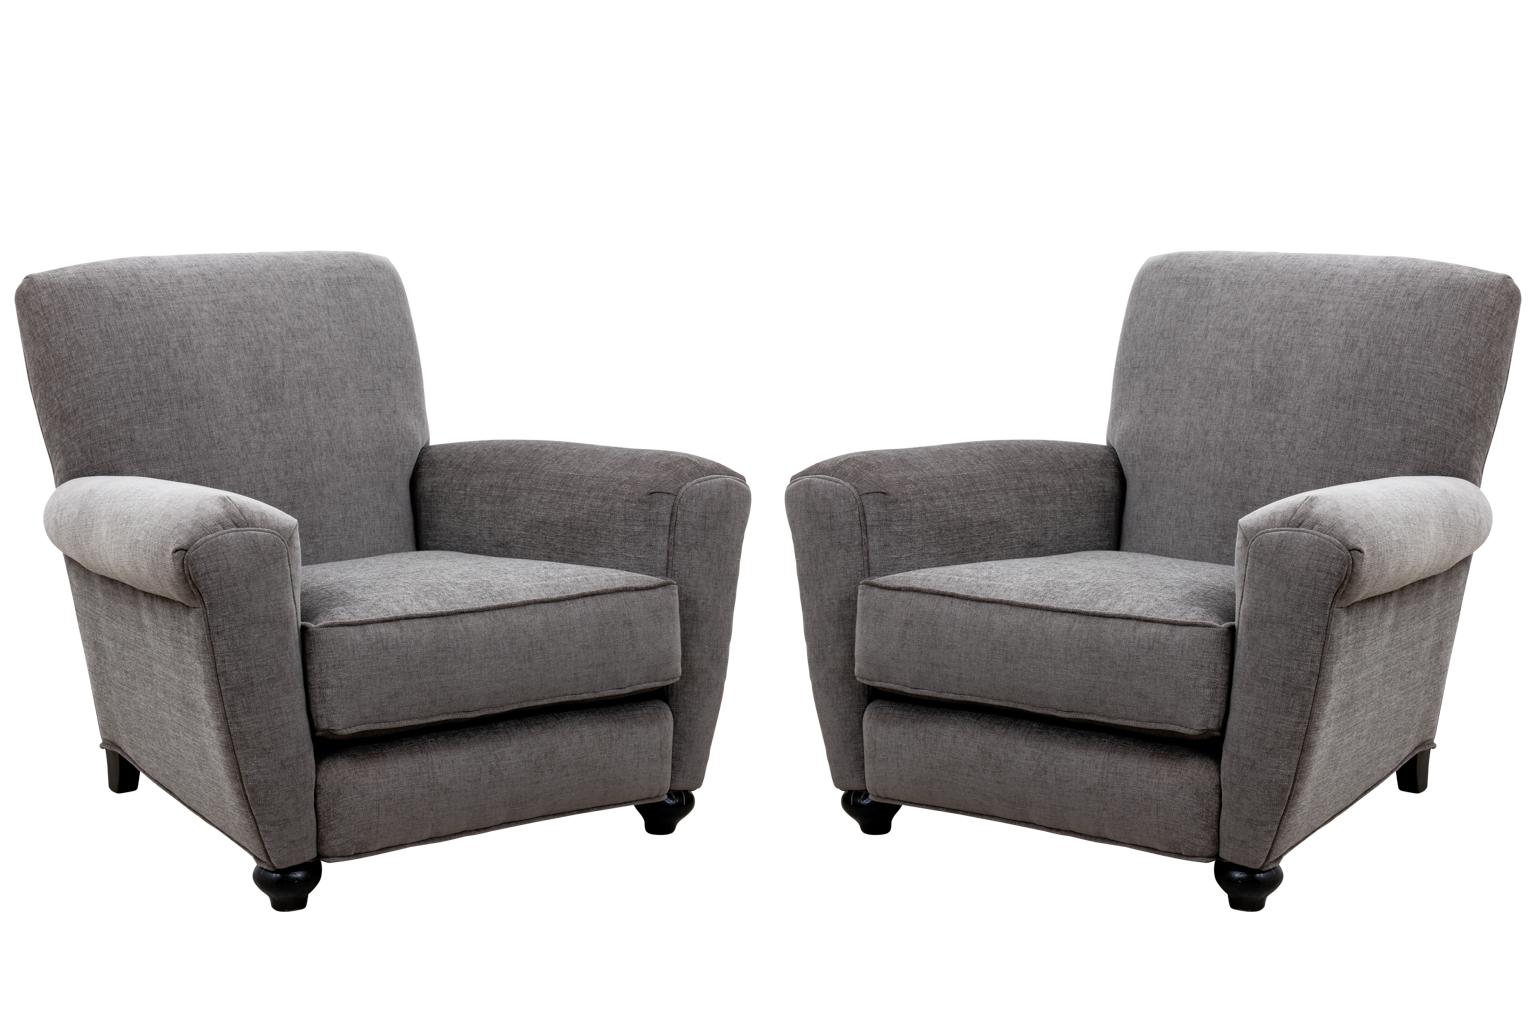 Pair 1920's sexy Art Deco club chairs newly upholstered in grey.